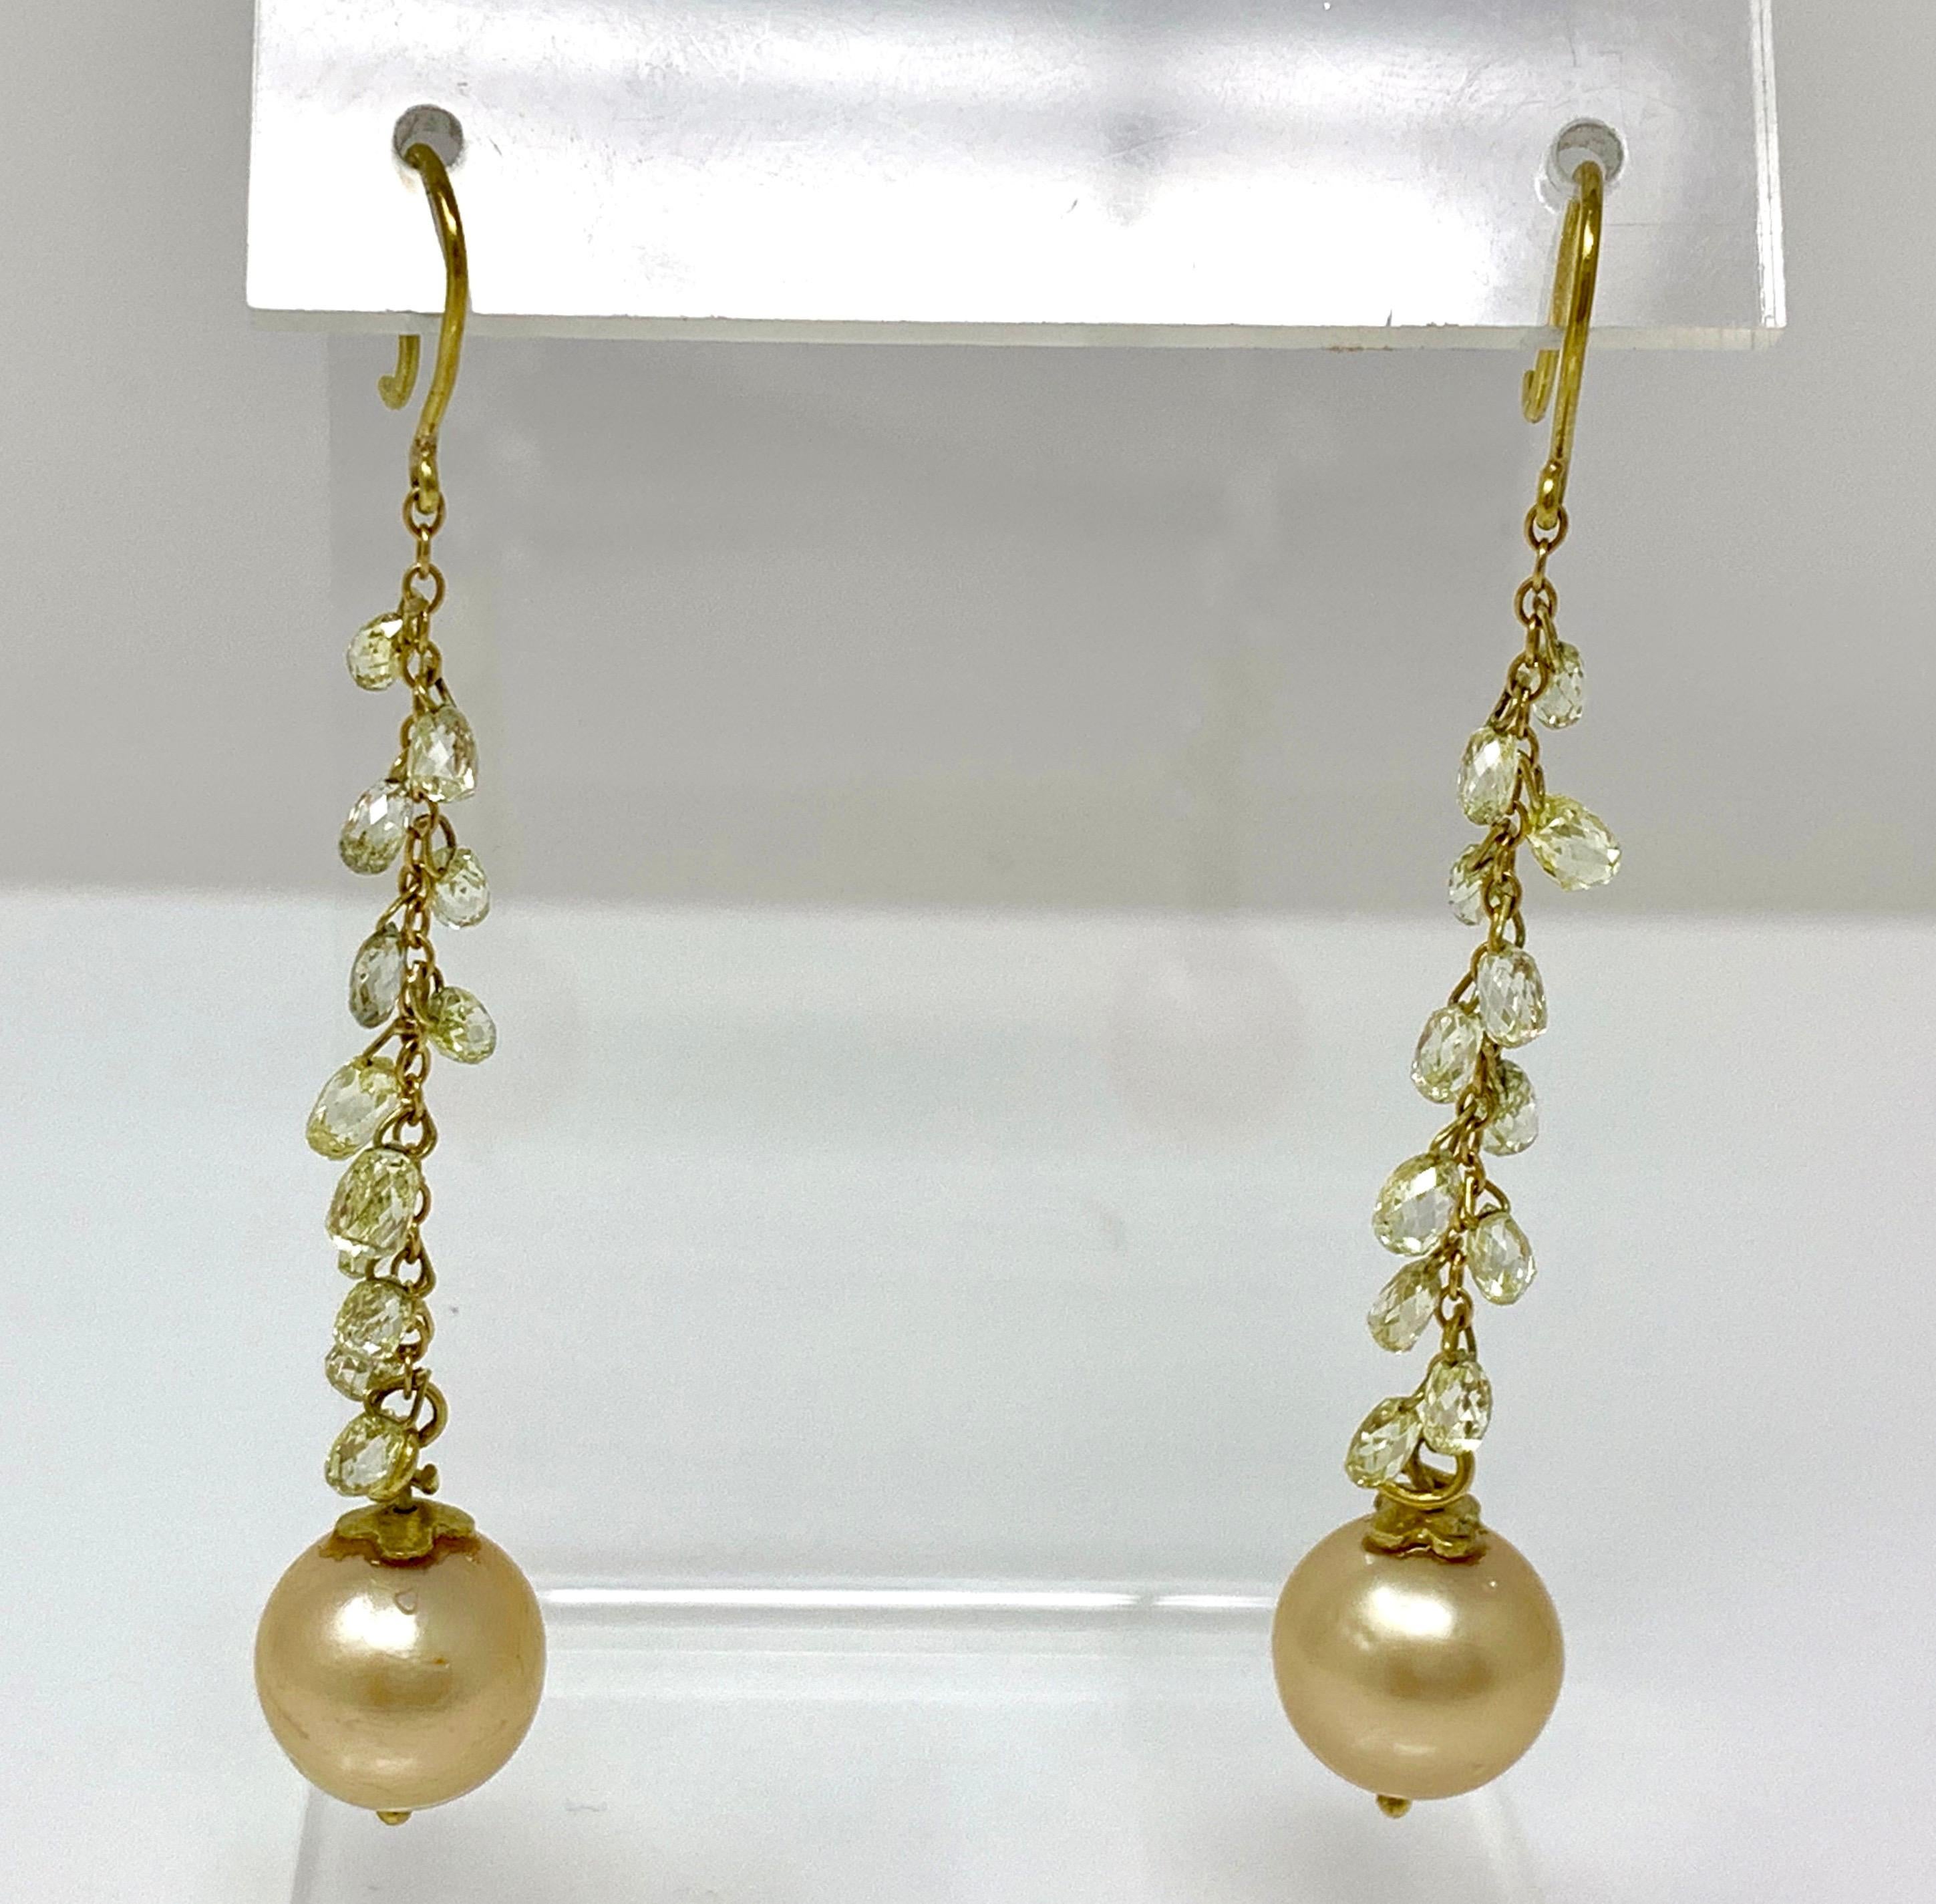 Contemporary Natural Yellow Briolette Diamond and South Sea Pearl Earrings in 18 Karat Gold